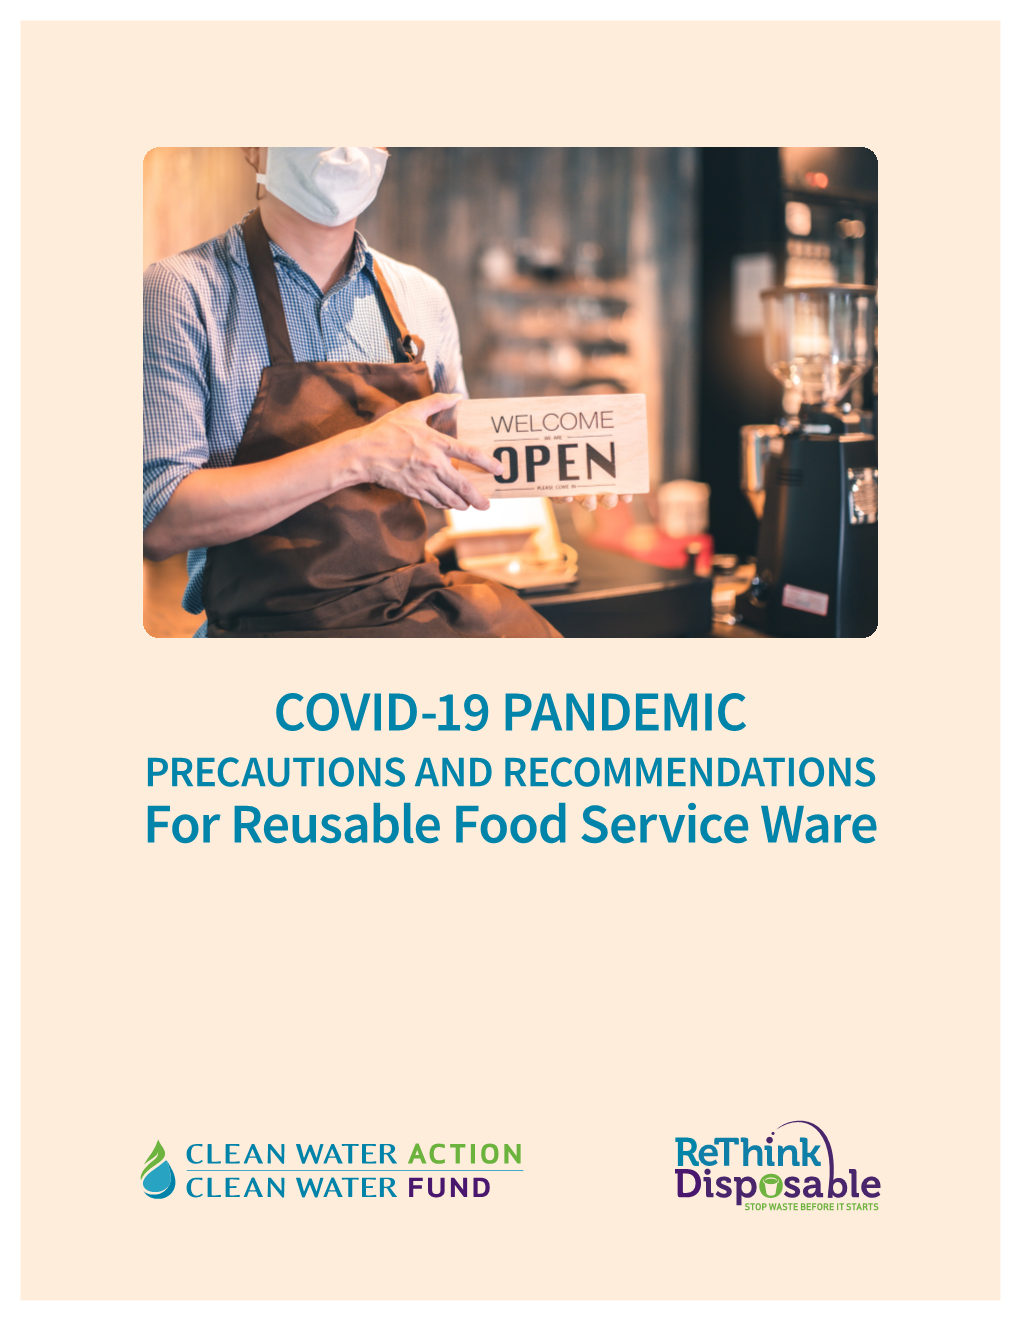 COVID-19 PANDEMIC PRECAUTIONS and RECOMMENDATIONS for Reusable Food Service Ware TLDR? Here’S the Bottom Line